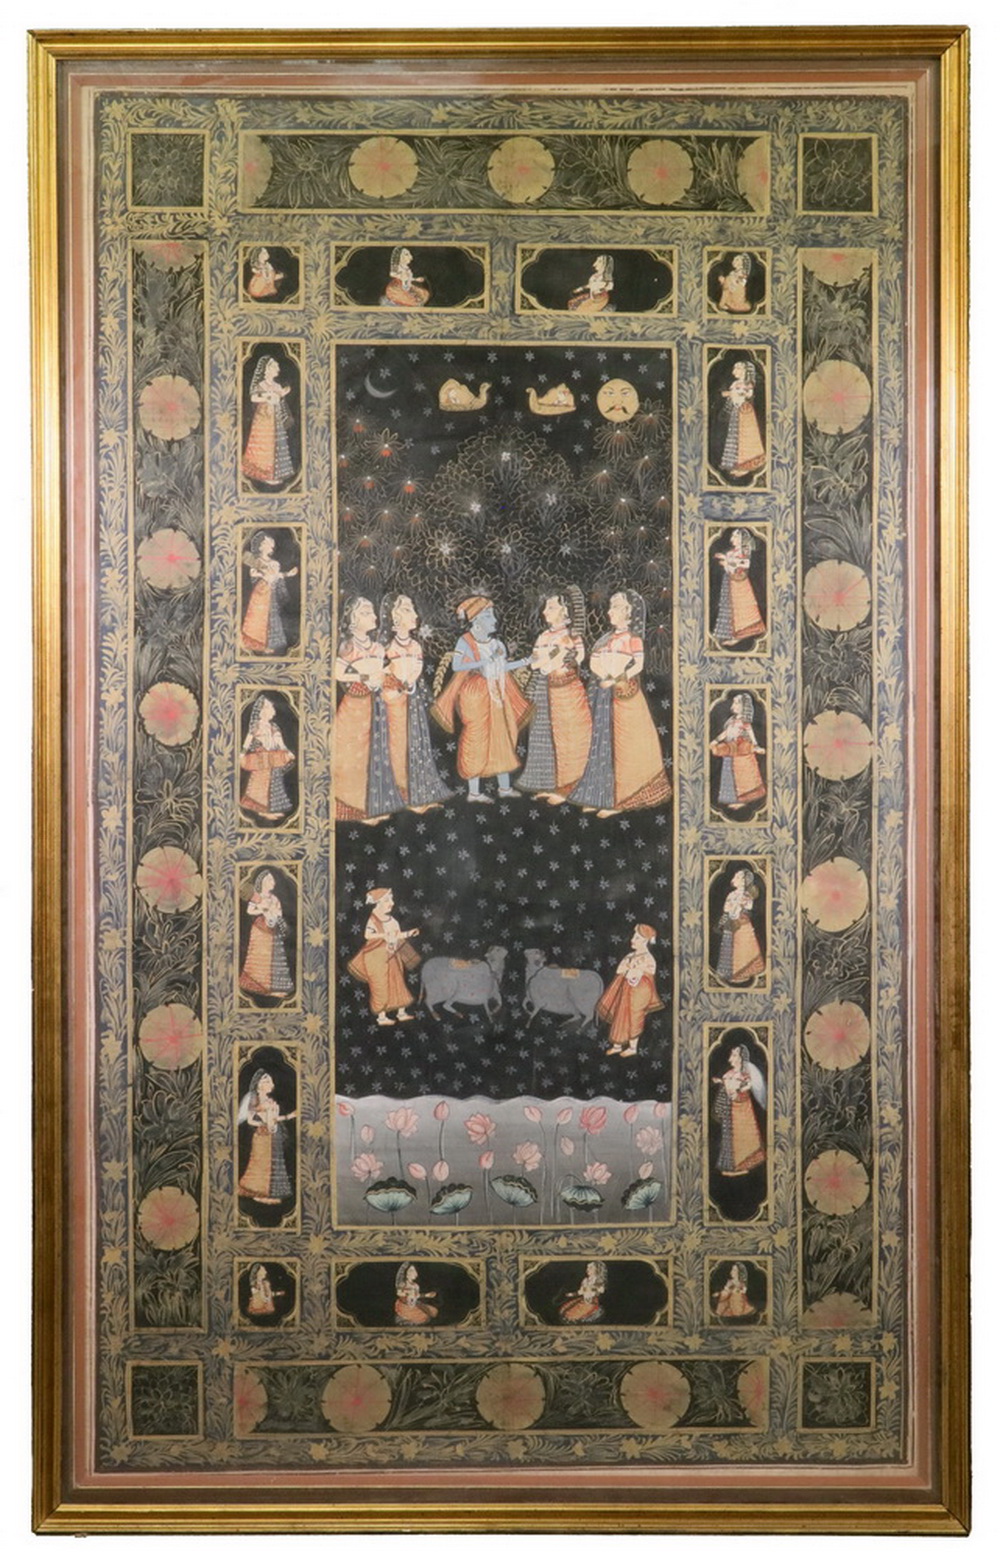 LARGE INDIAN PAINTING ON CLOTH 2b1827